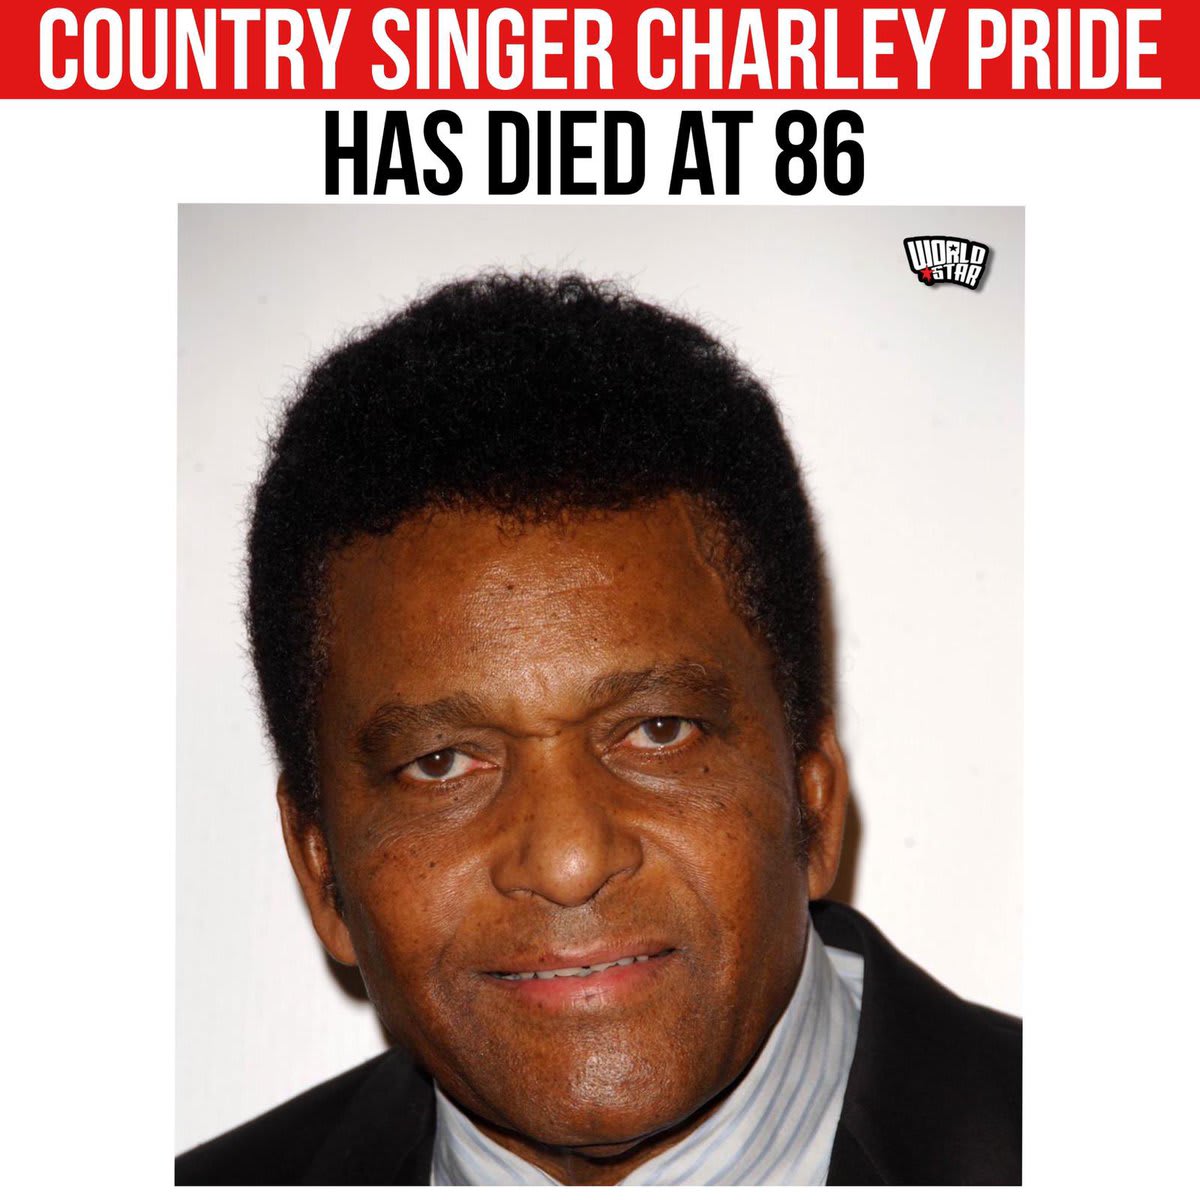 According to reports, singer CharleyPride has died at the age of 86 due to complications from #Covid19. Pride was the first African American artist to be inducted into the Country Music Hall of Fame. Our thoughts and prayers are with his family and friends.